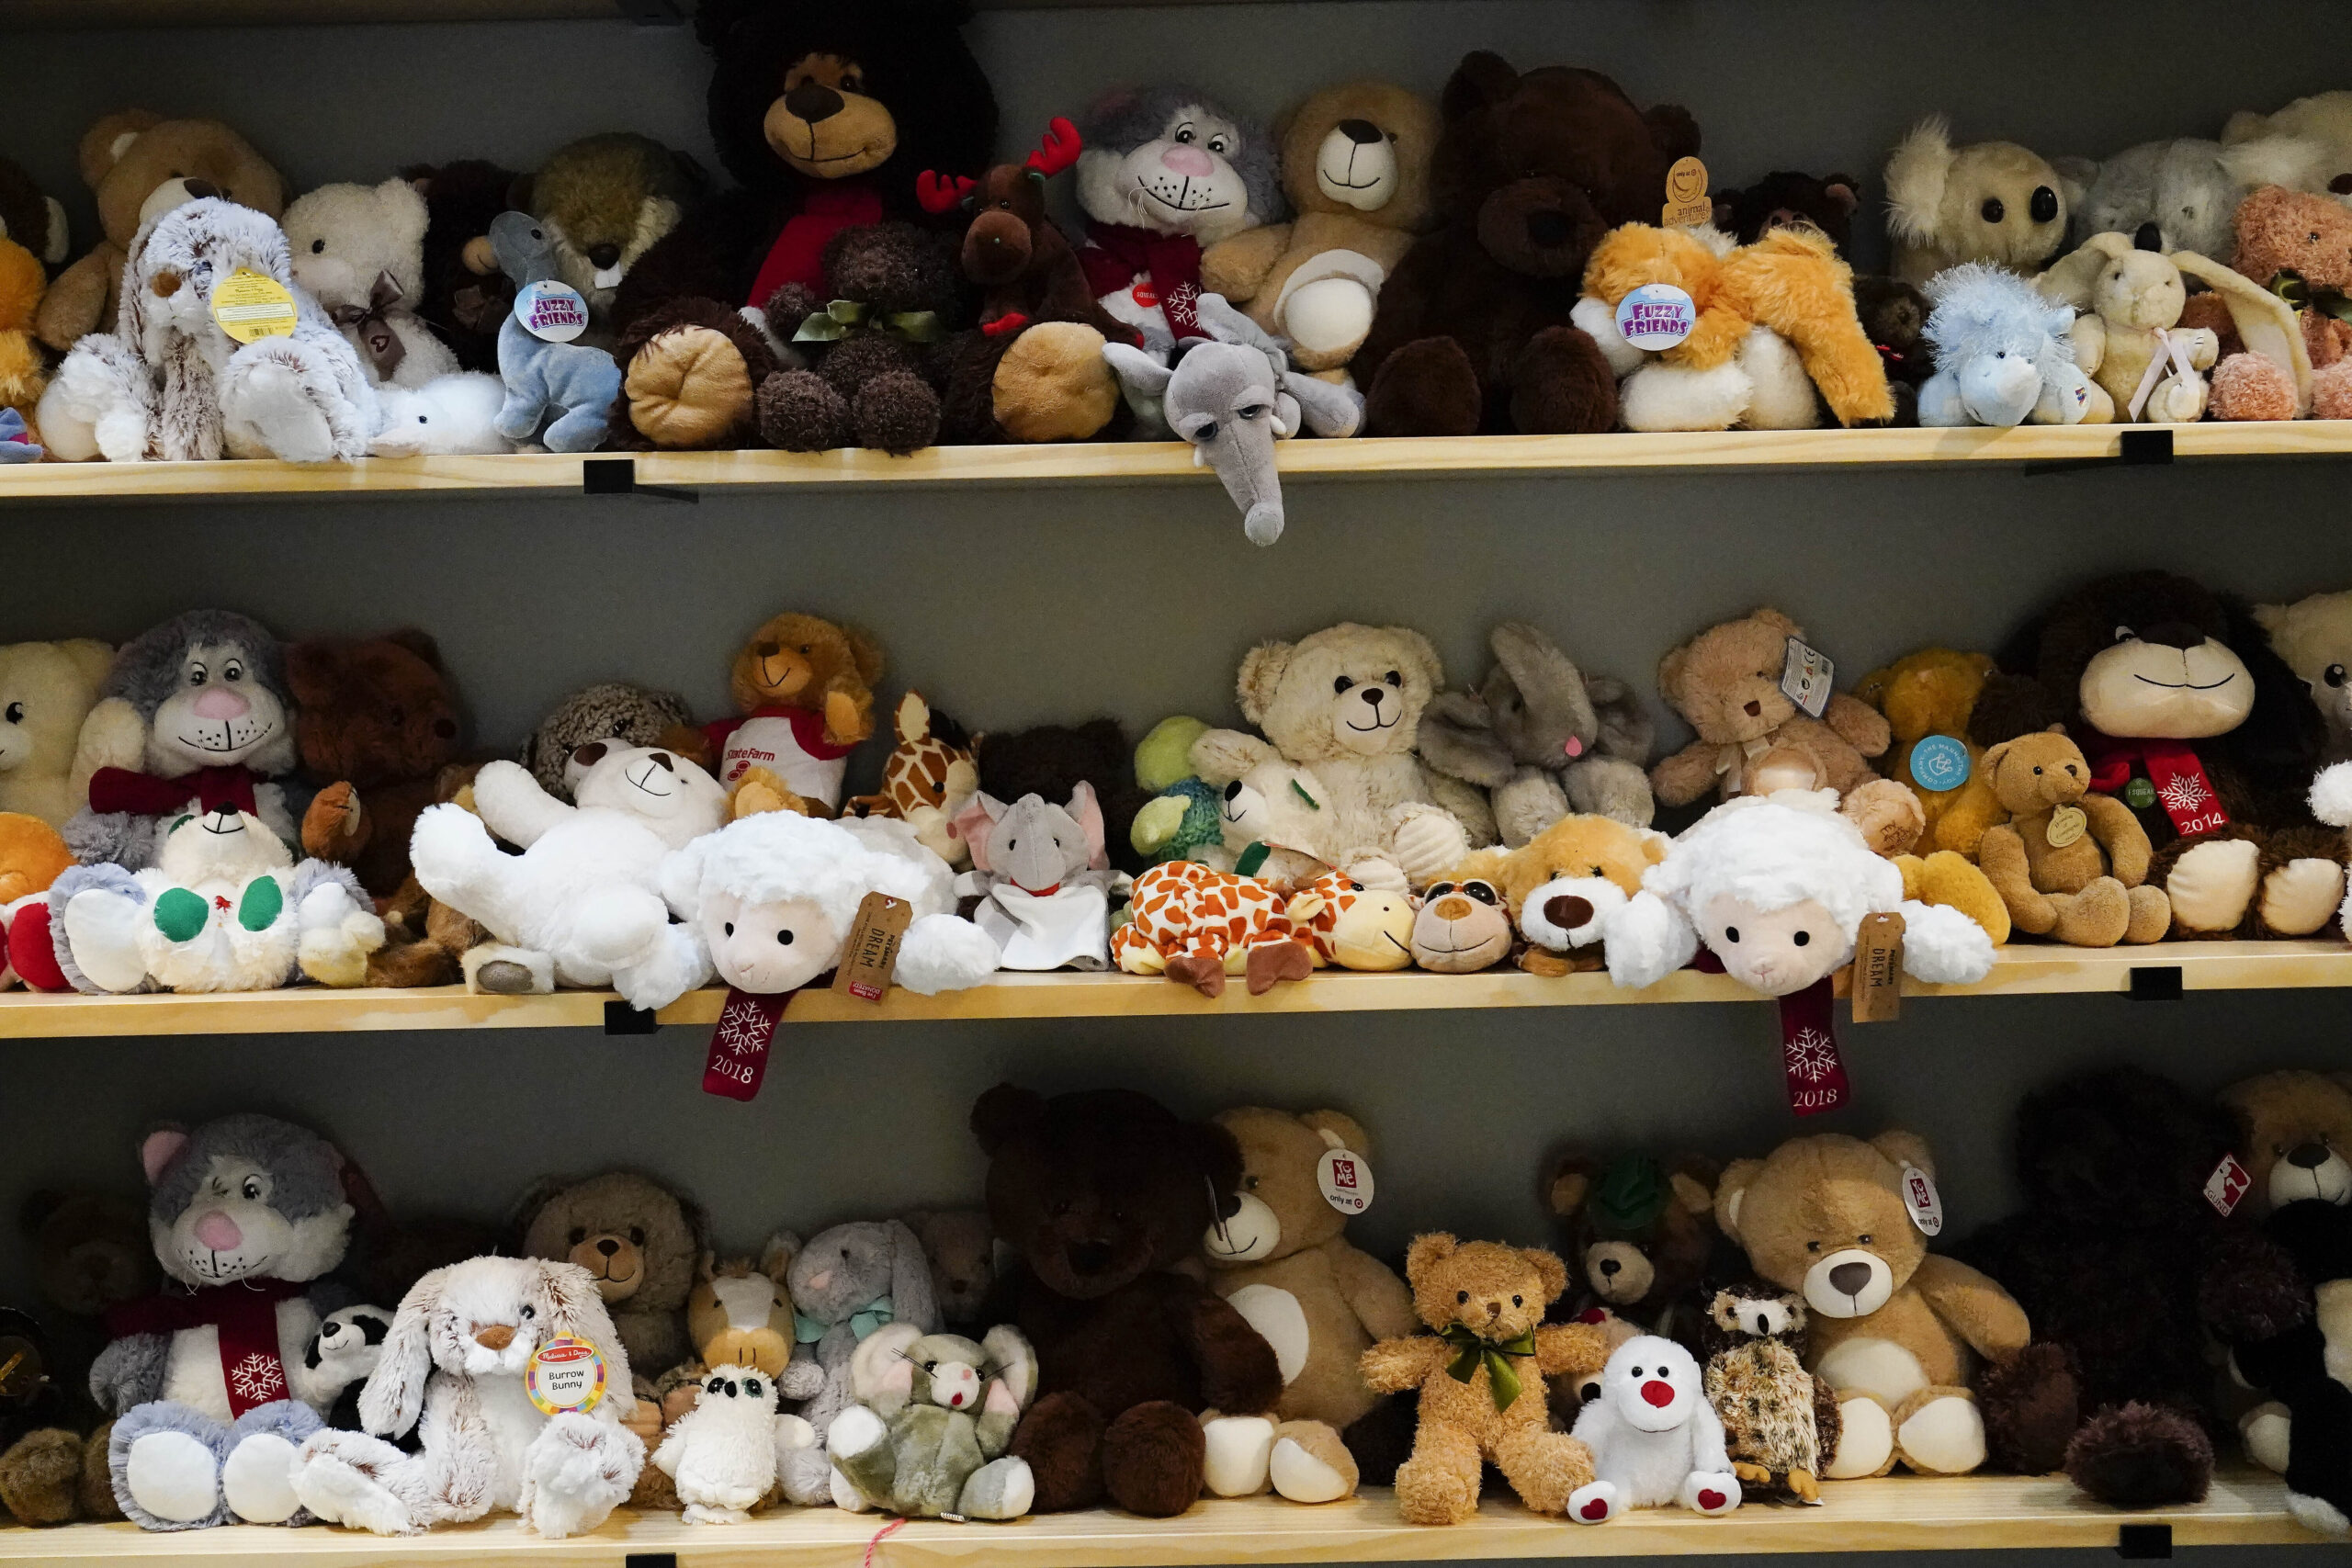 Stuffed animals on shelves at the Georgia Center for Child Advocacy.